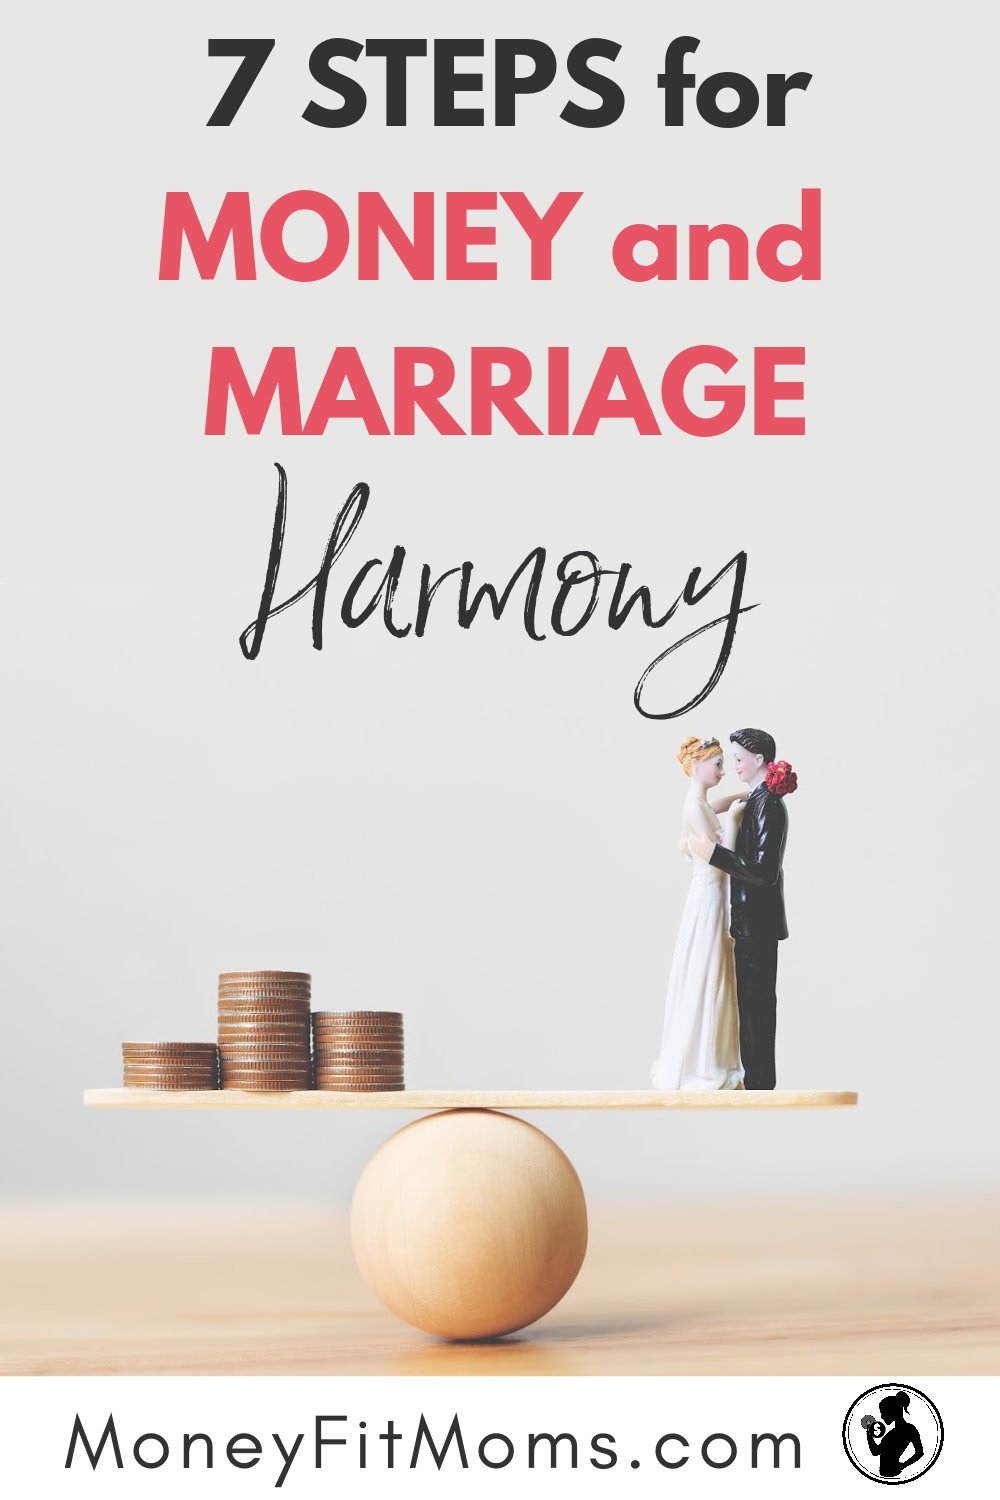 Money and Marriage